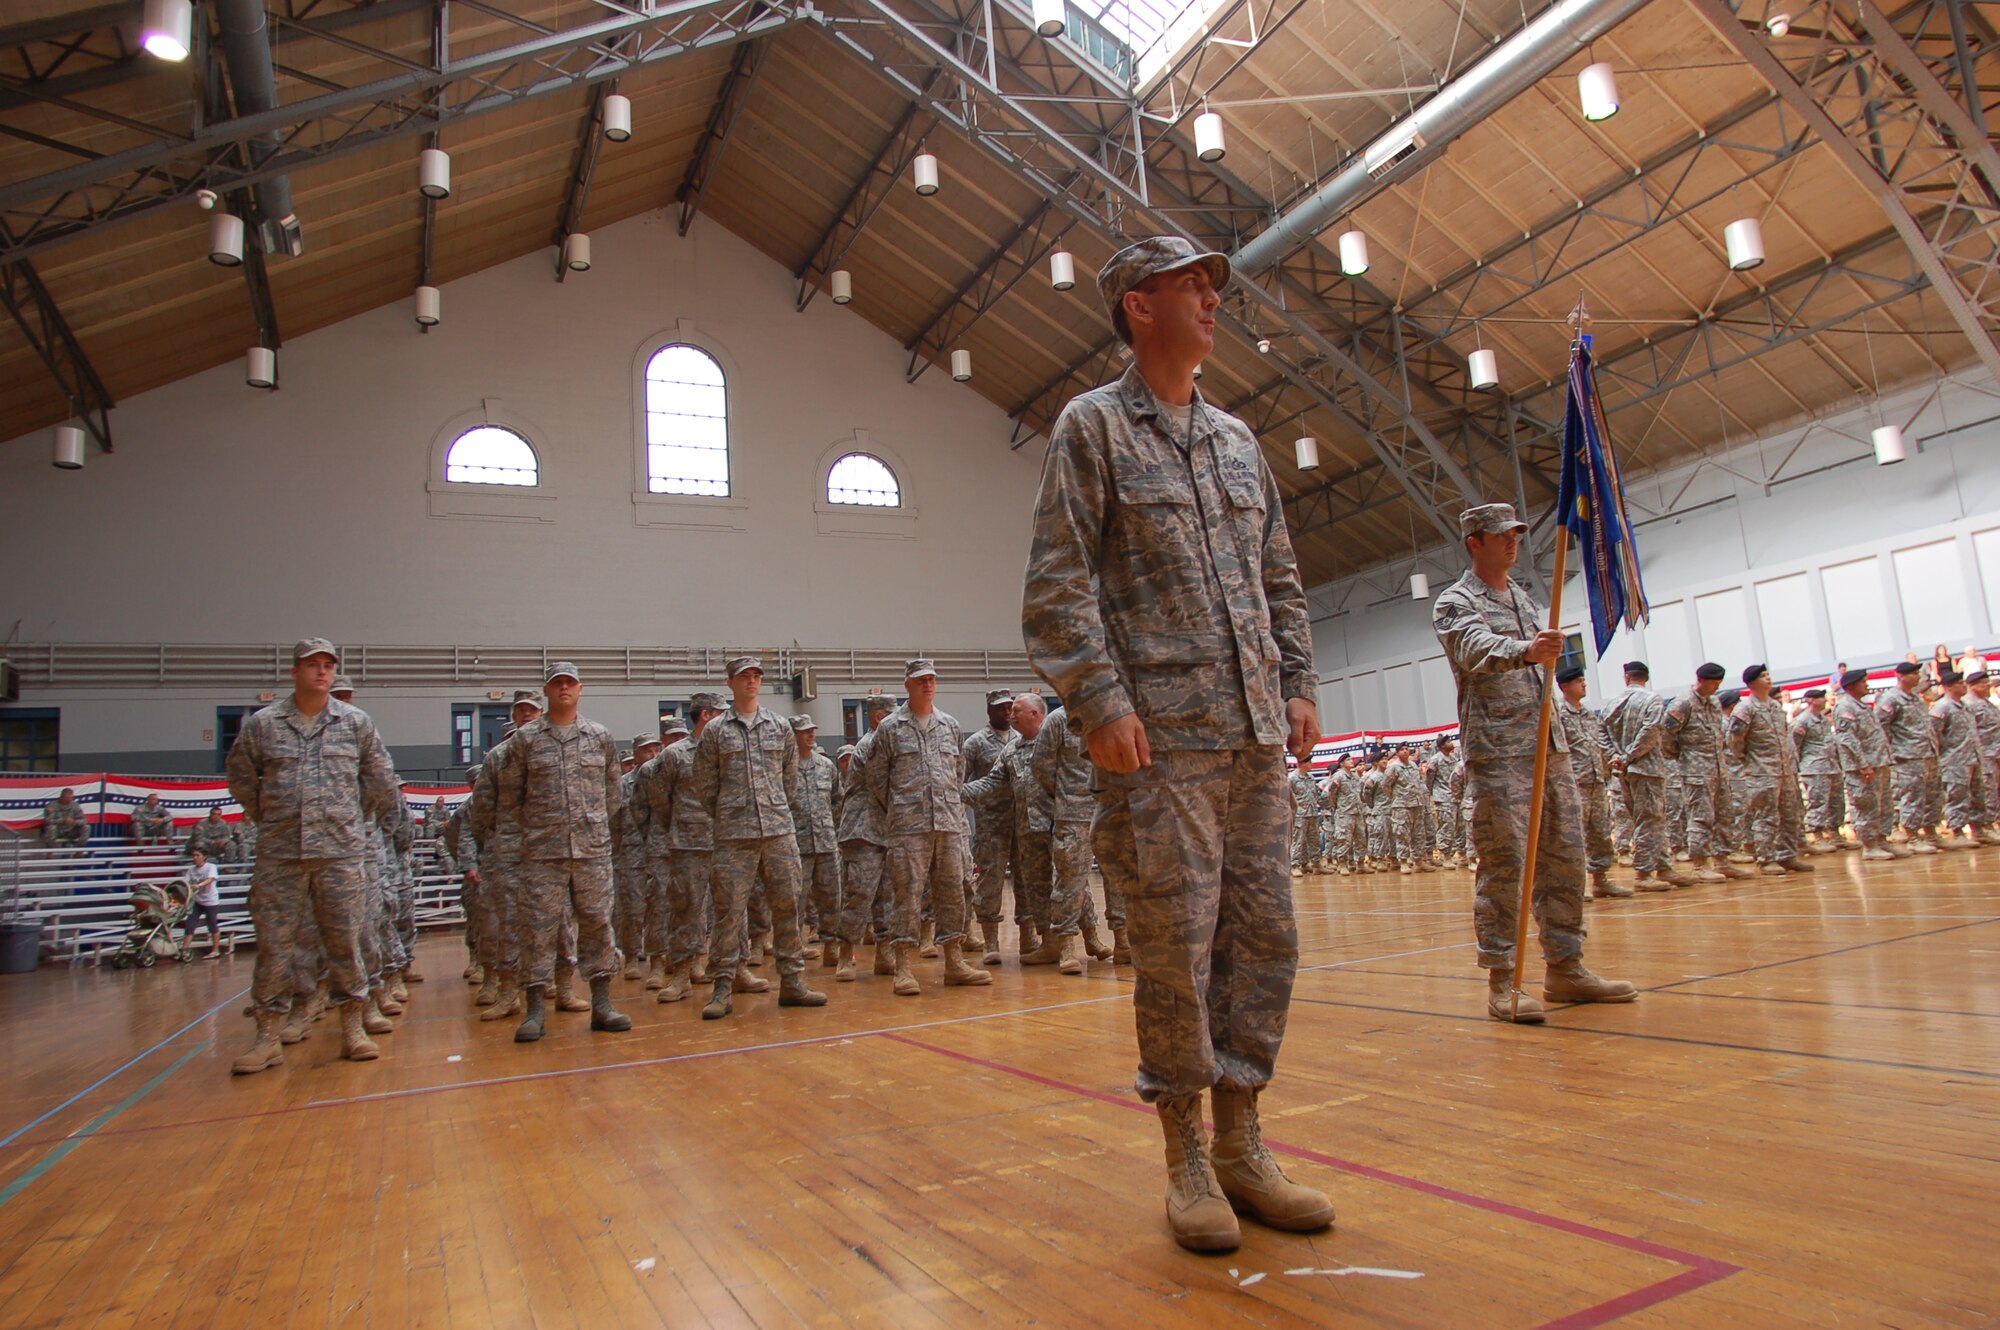 Lt. Col. William Neri, commander, 103rd Air Control Squadron, prepares to call his troops to attention at the Freedom Salute Ceremony, Aug. 16, 2009, held at the William A. O’Neil Armory in Hartford, Conn.  The 103rd ACS returned home from overseas contingency operations providing radar support for 277,000 square miles of airspace for coalition forces. (U.S. Air Force photo by Tech. Sgt. Joshua Mead)
